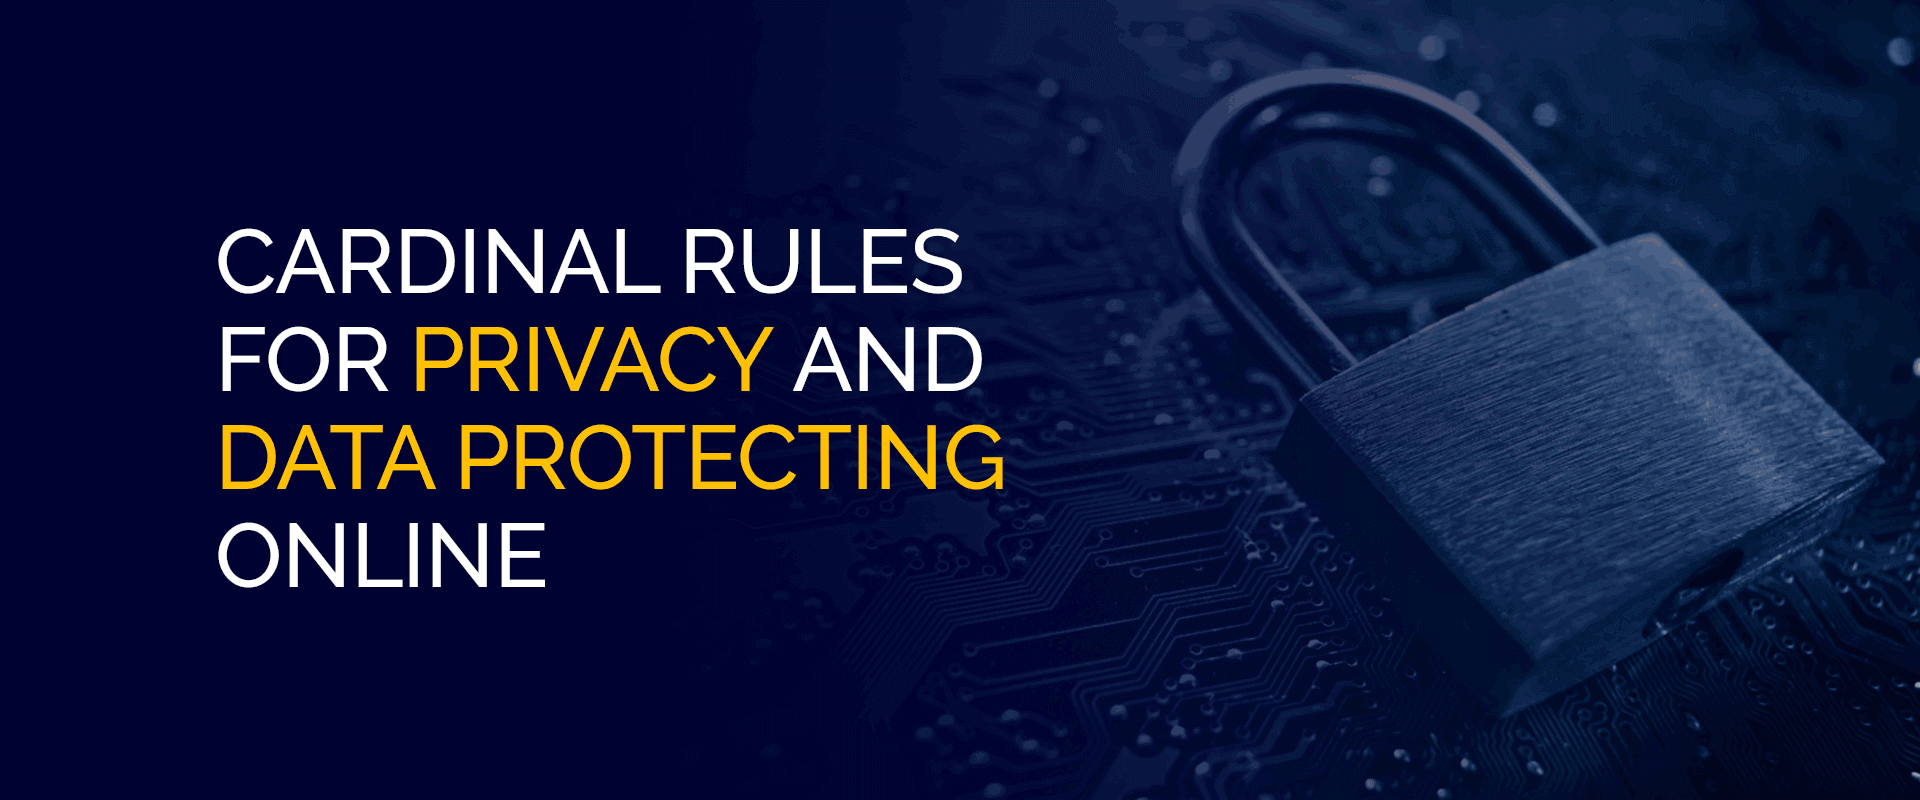 Cardinal Rules for Privacy and Data Protecting Online